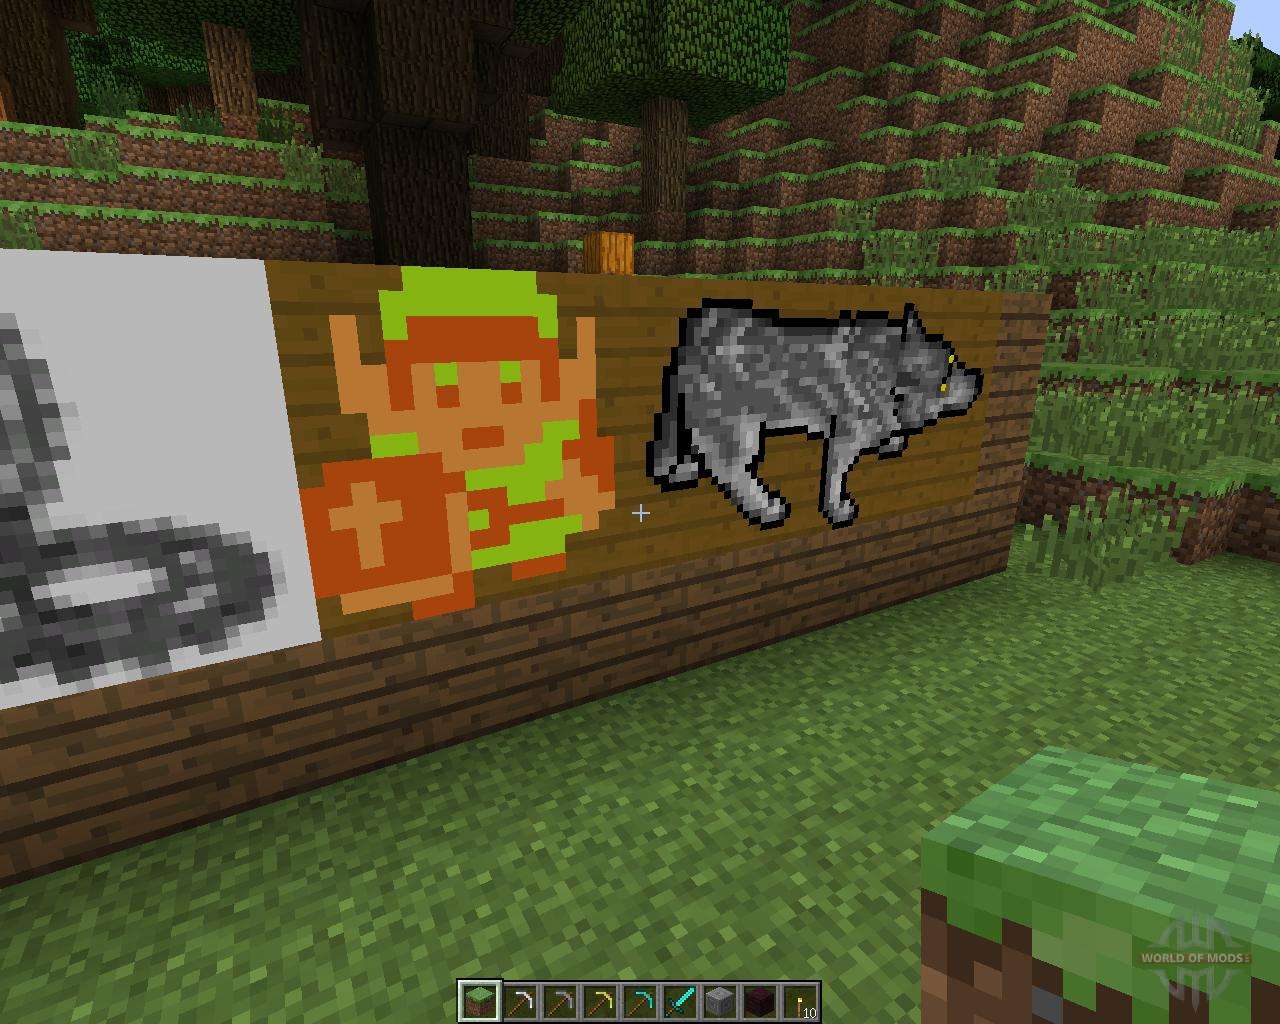 Animated Paintings [16x][1.7.2] for Minecraft